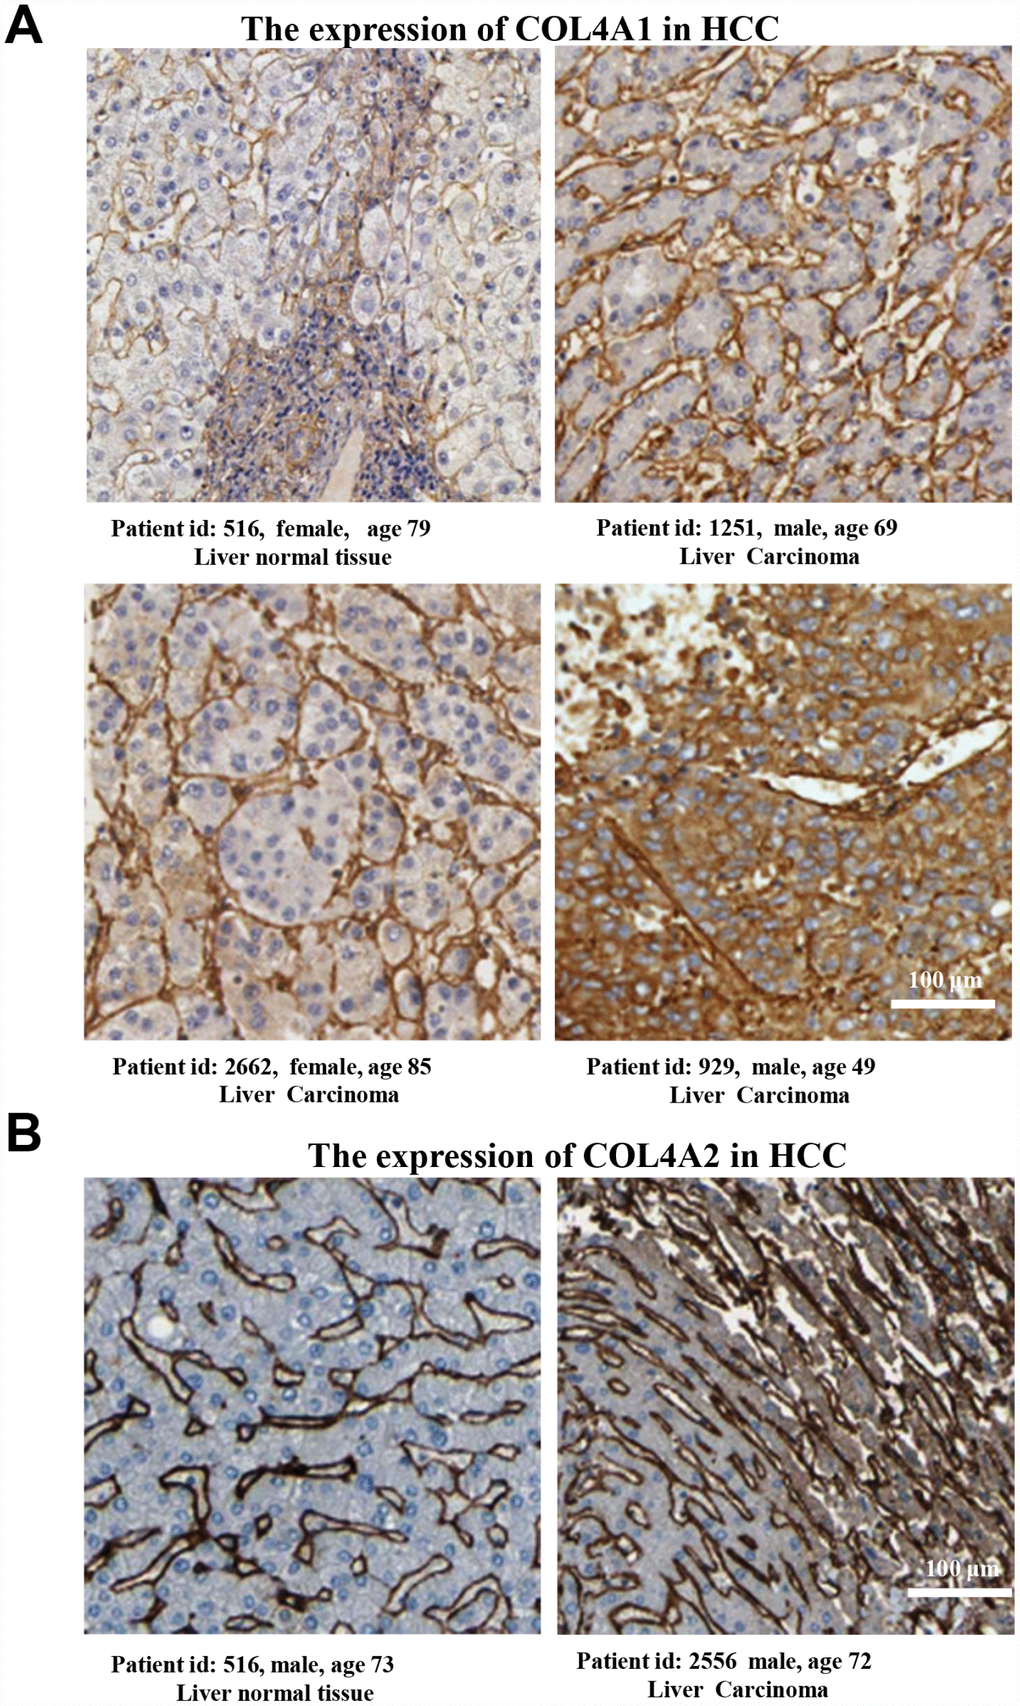 The COL4A1 and COL4A2 proteins were expressed higher in HCC tissues than in the normal liver tissue. (A–B) Immunohistochemistry staining showing the protein expression of COL4A1 (A) and COL4A2 (B) in liver normal tissues and liver carcinoma.